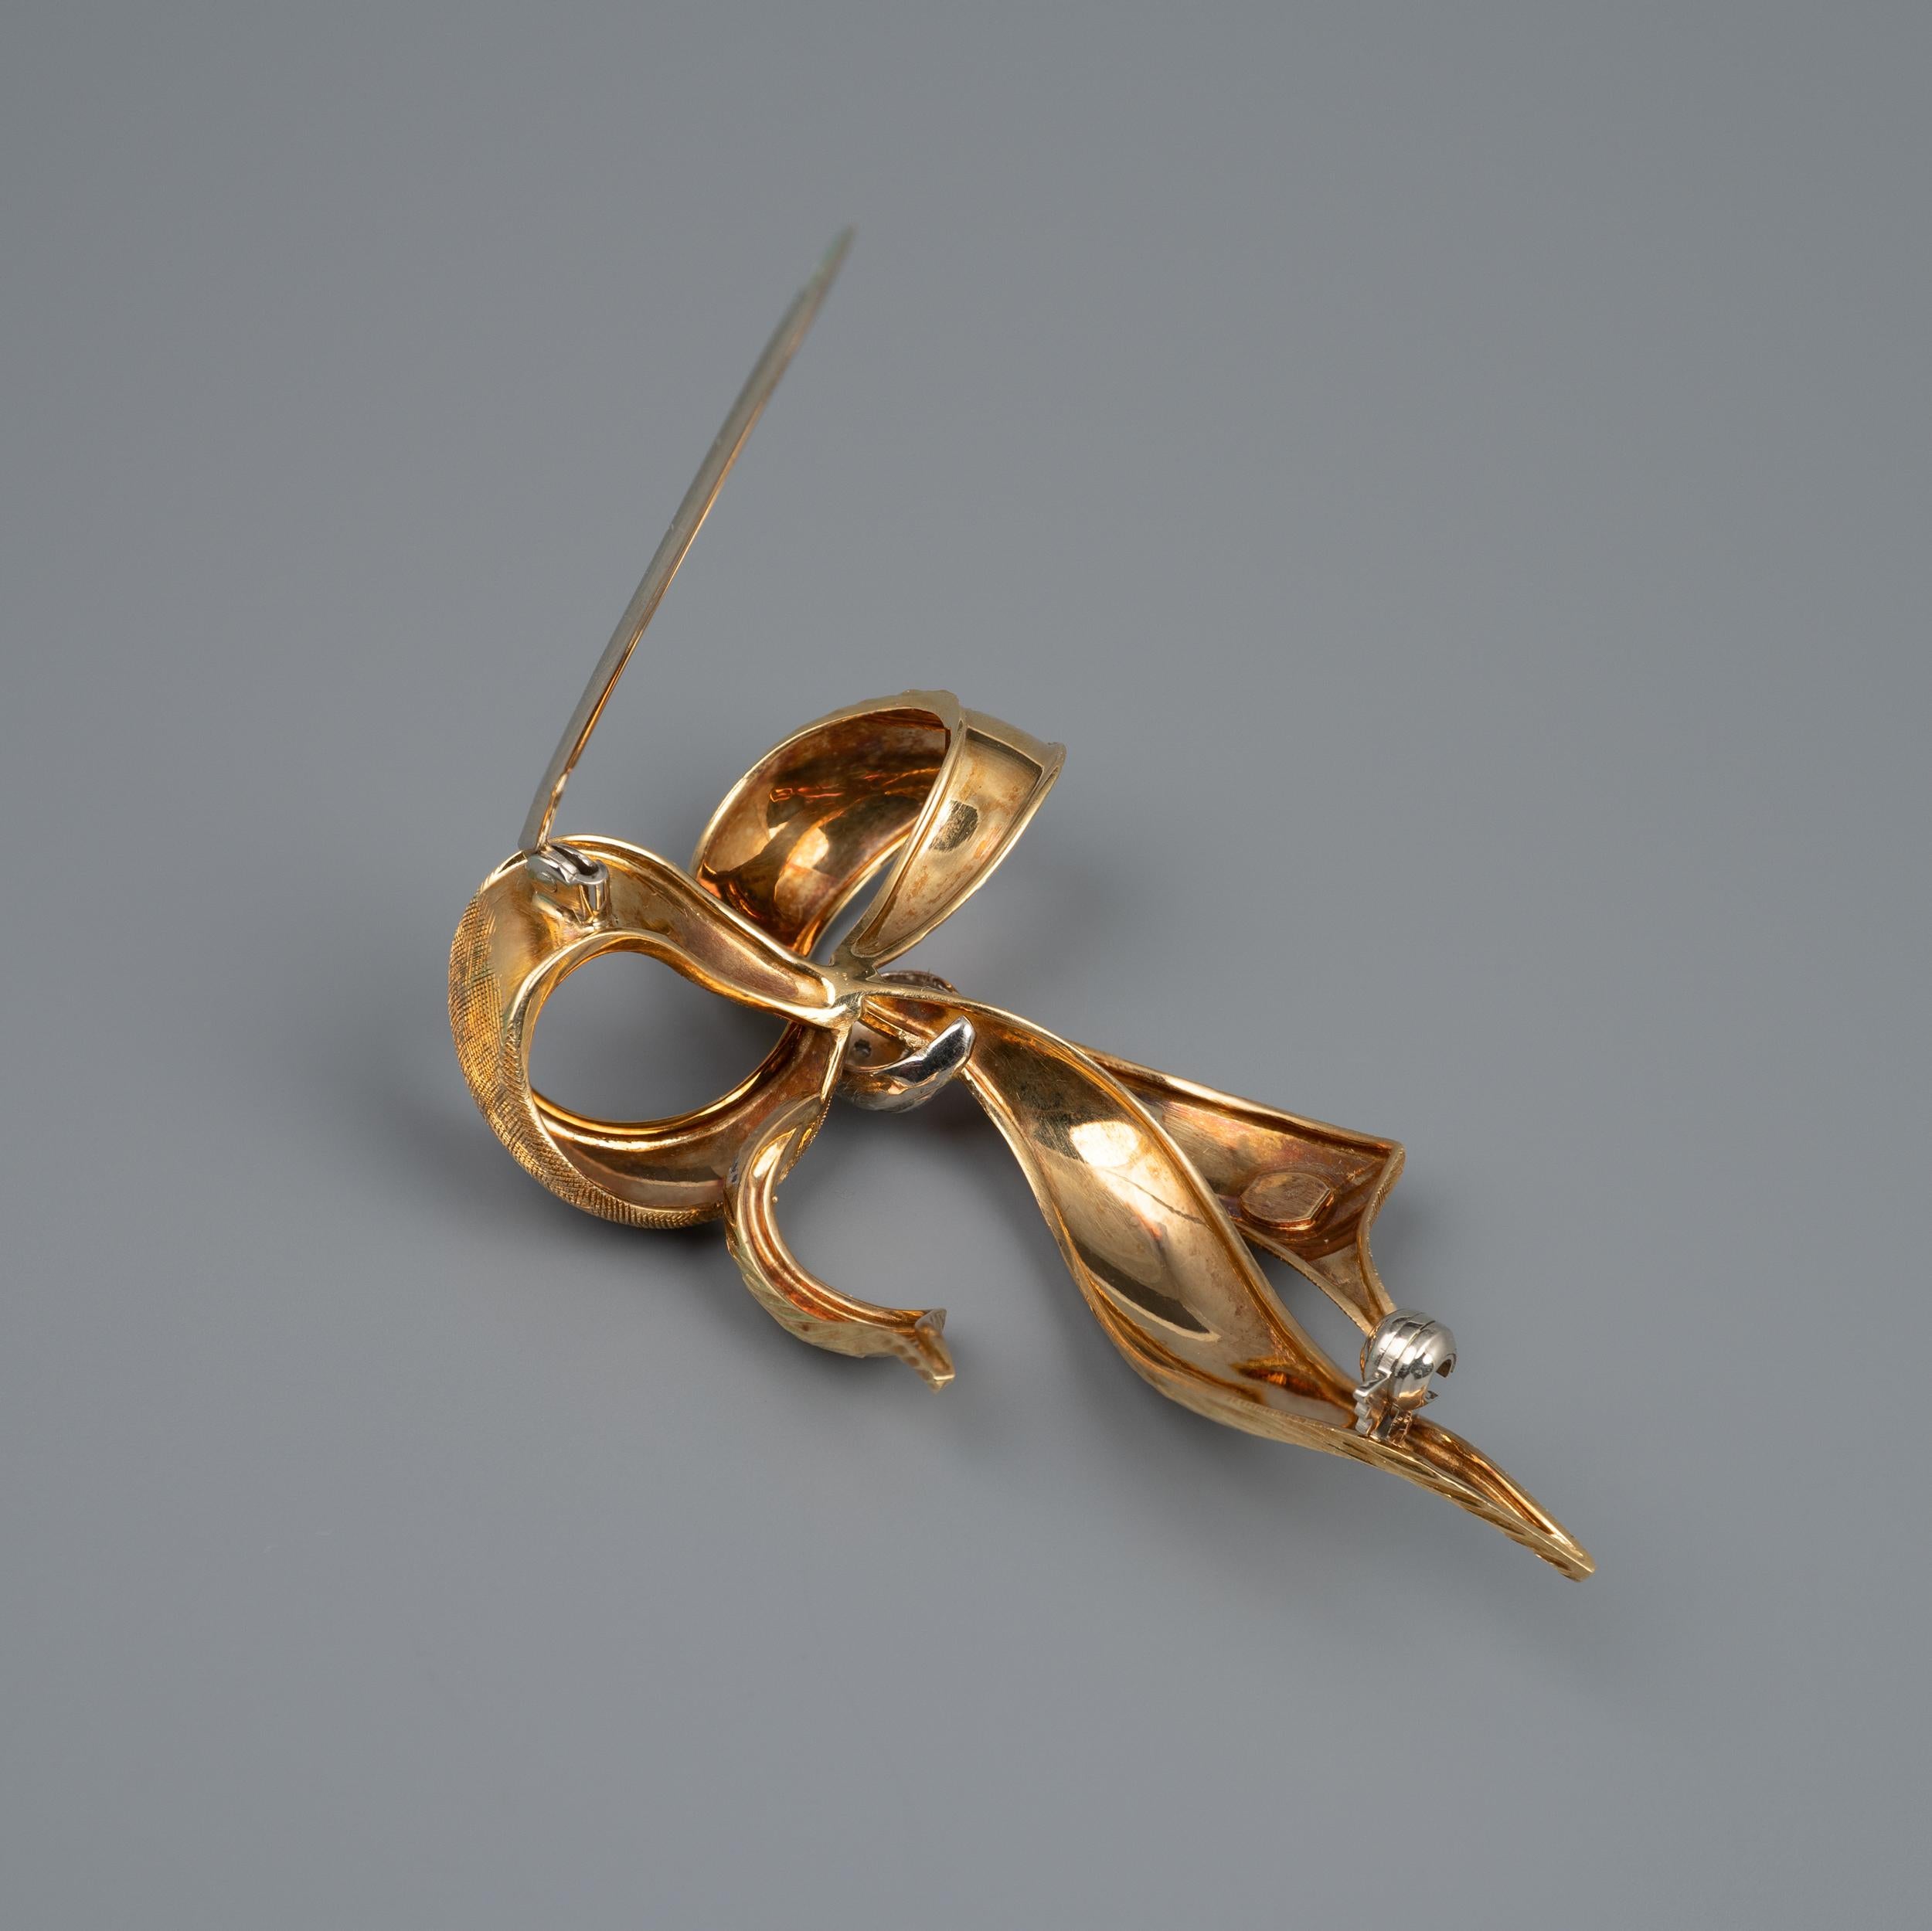 This 18 karat gold vintage Ribbon Bow brooch features diamonds set in white gold.

A substantial size, the brooch is crafted into loops of gold ribbon crafted with two different textures. The center of the bow has a white gold band set with three